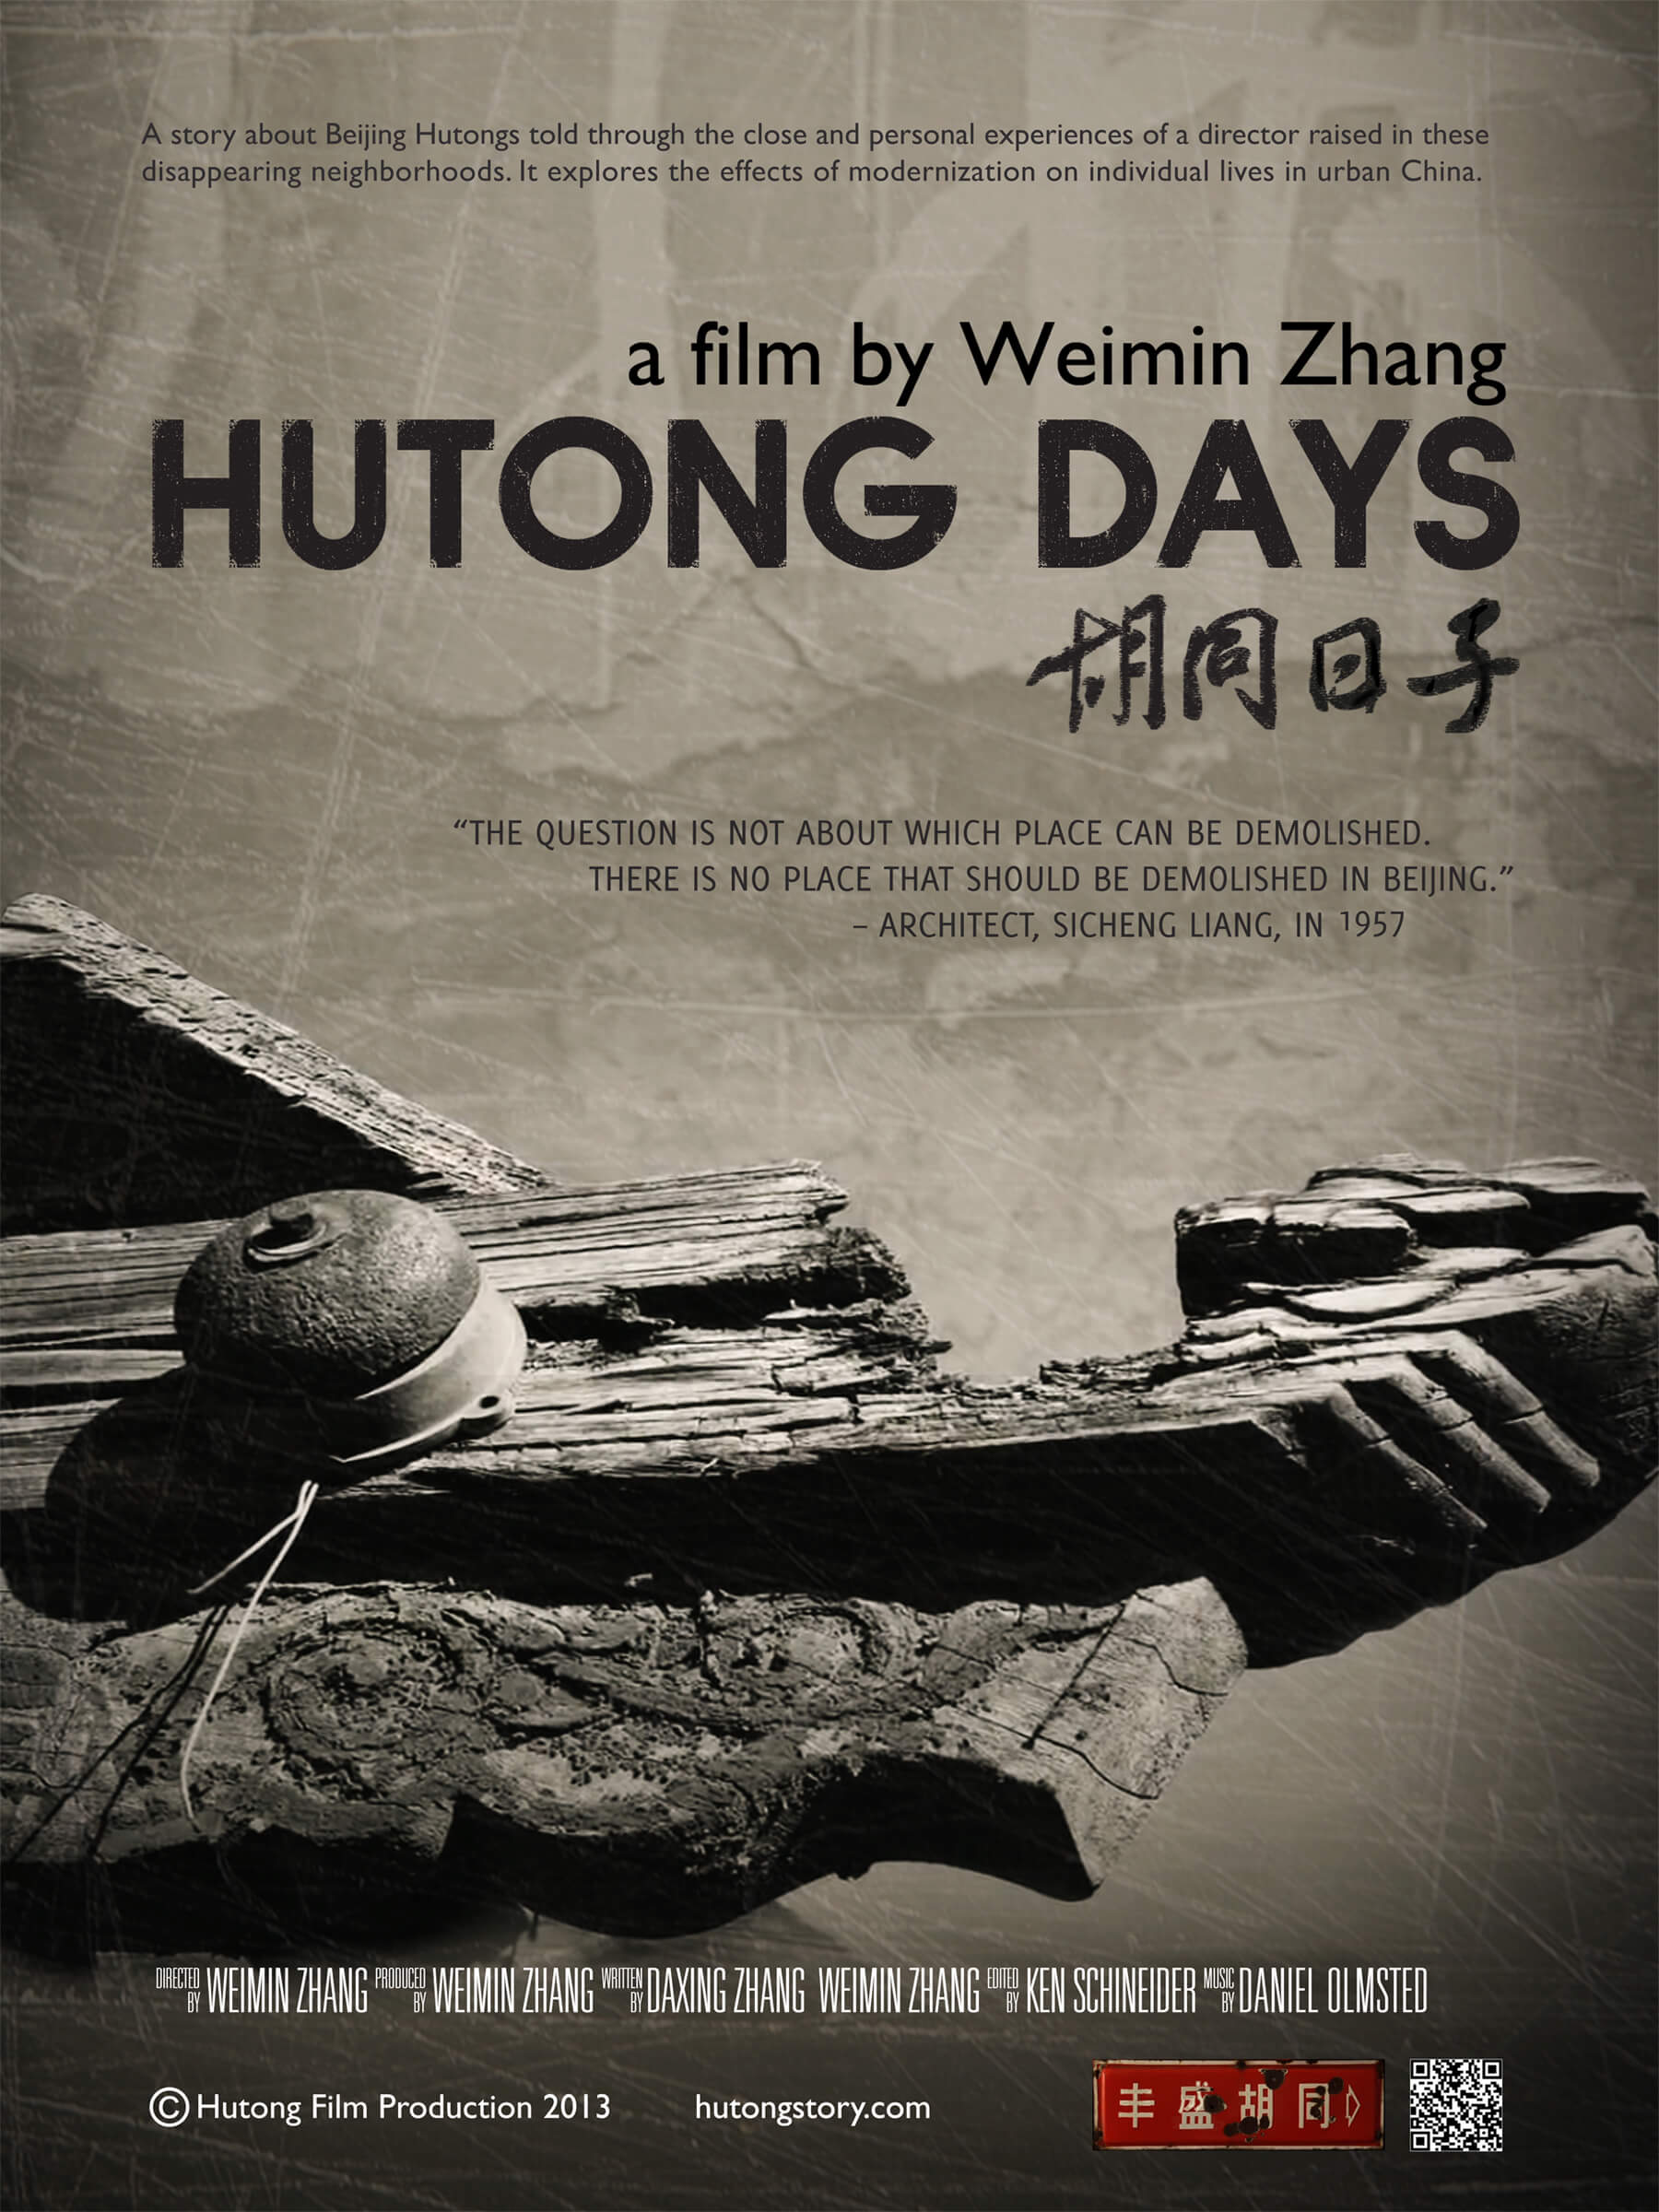 Poster of Missing Home: The Last Days of the Beijing Hutongs Weimin Zhang. A brief synopsis of the film, the director and title, and quote from Sicheng Liang are listed above an old bell sitting on top of damaged wooden framework. The poster is in sepia tones.